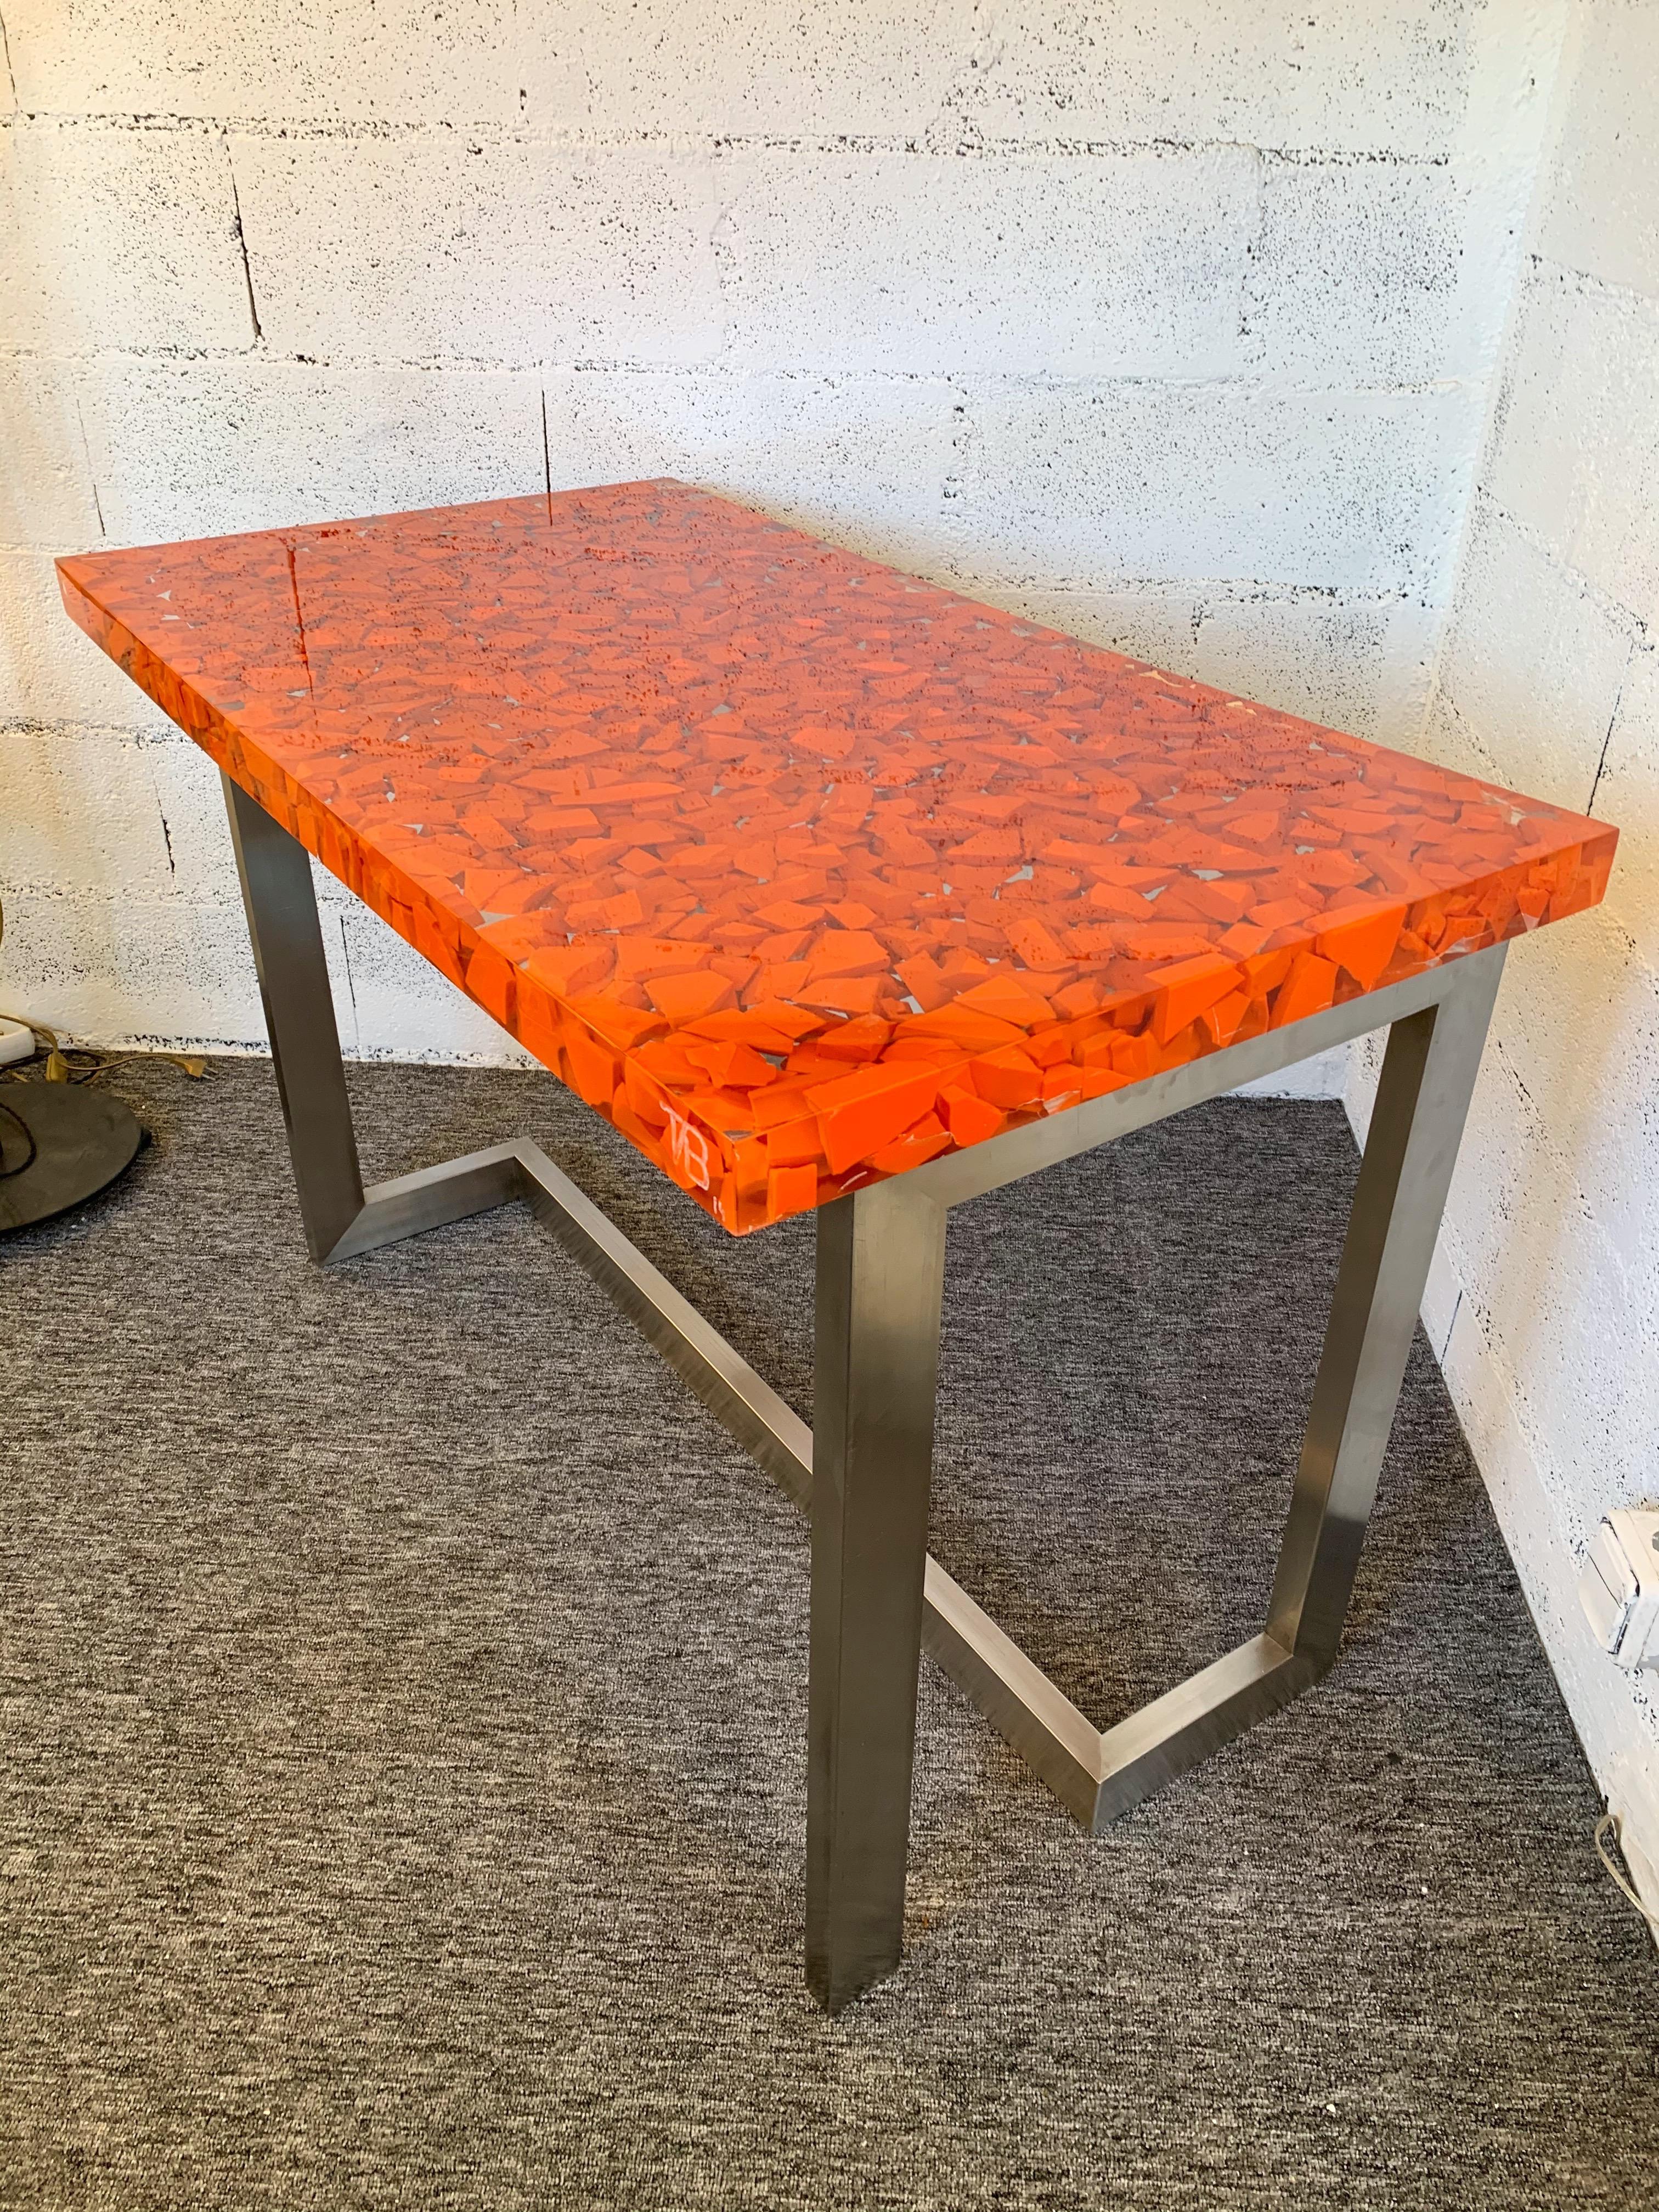 Console table or desk massive resin orange inclusion, nice stainless steel feet by the artist Thomas Brant. Monogram TB and date 2014. Edition of 10 exemplary. Different work from the fractal resin of Pierre Giraudon, François Godebski, Marie Claude